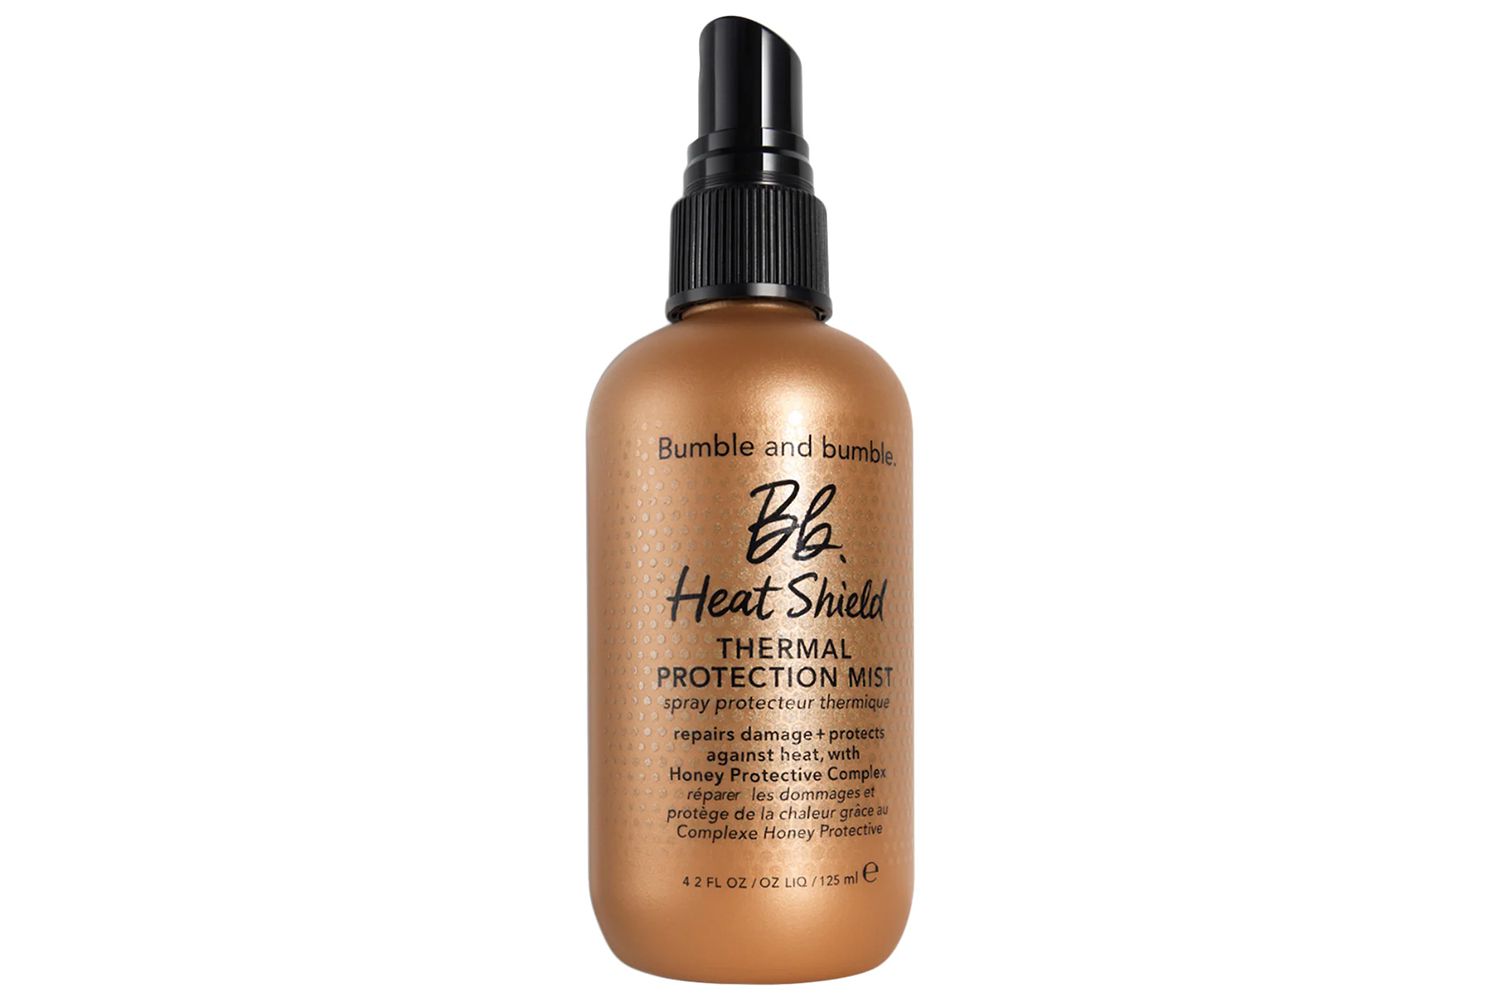 Bumble and bumble Bb. Heat Shield Thermal Protection Hair Mist